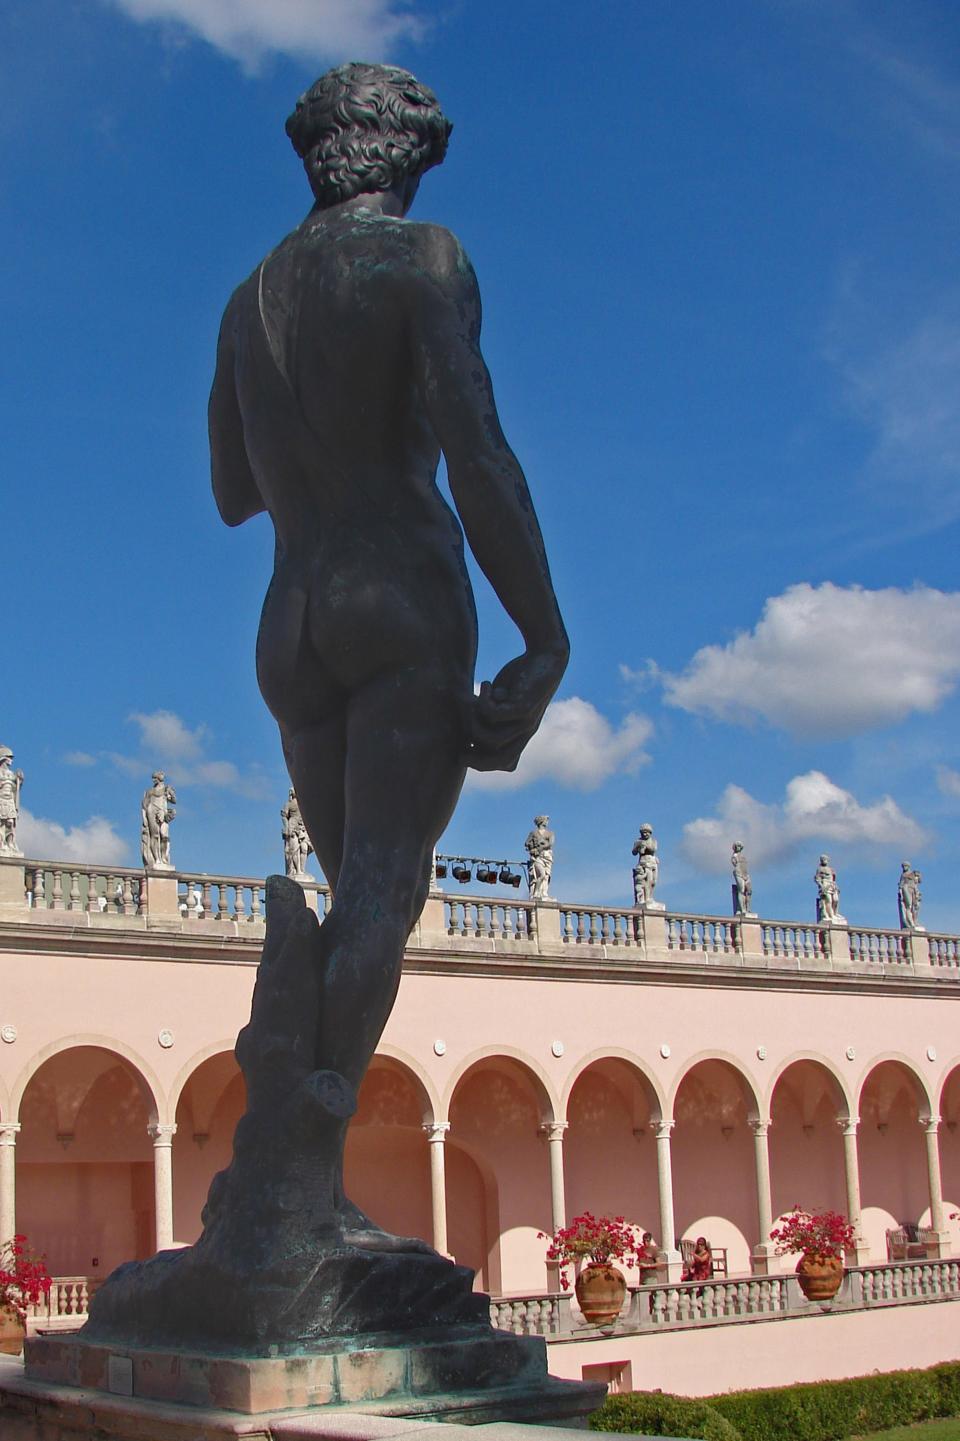 A 16-foot copy of Michelangelo's David towers over the courtyard at the Ringling Museum of Art in Sarasota, Florida.